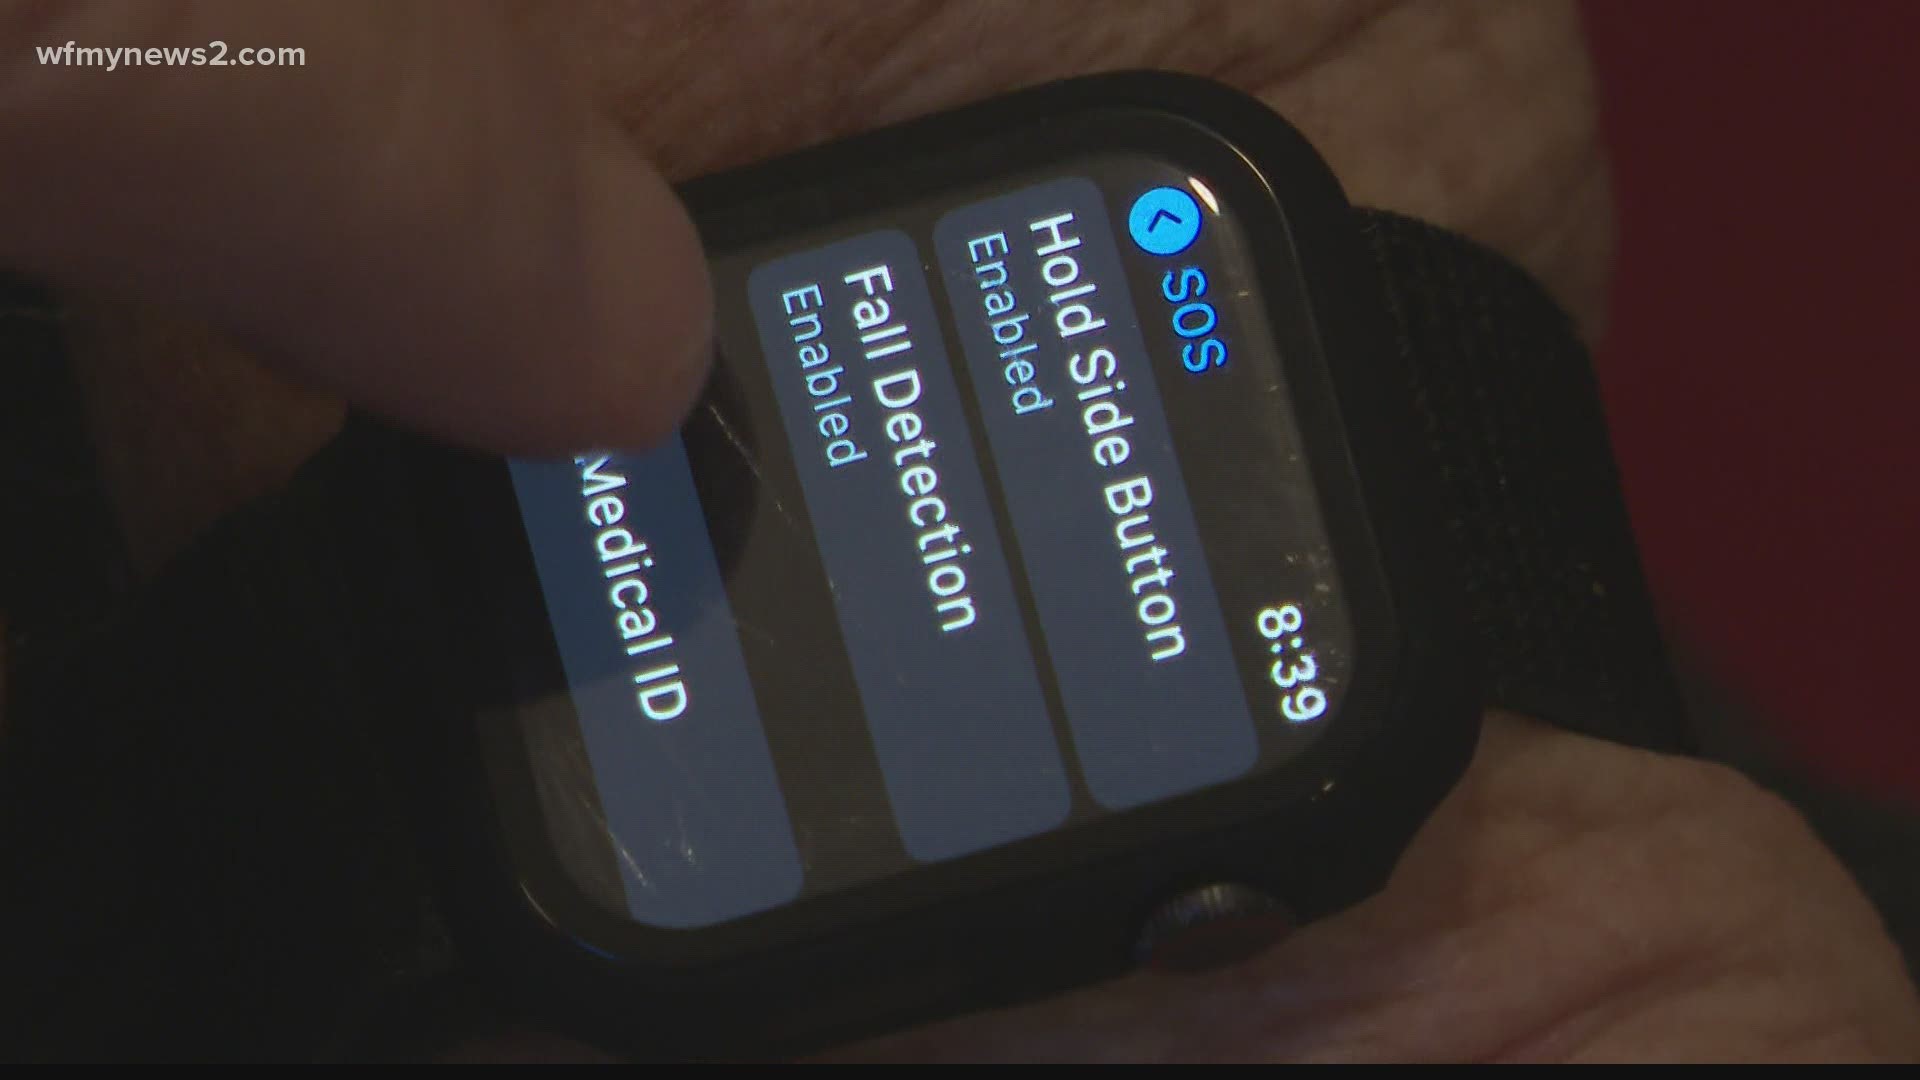 Mike Yager collapsed in his driveway. His wife wasn't home, but his Apple Watch knew just what to do.